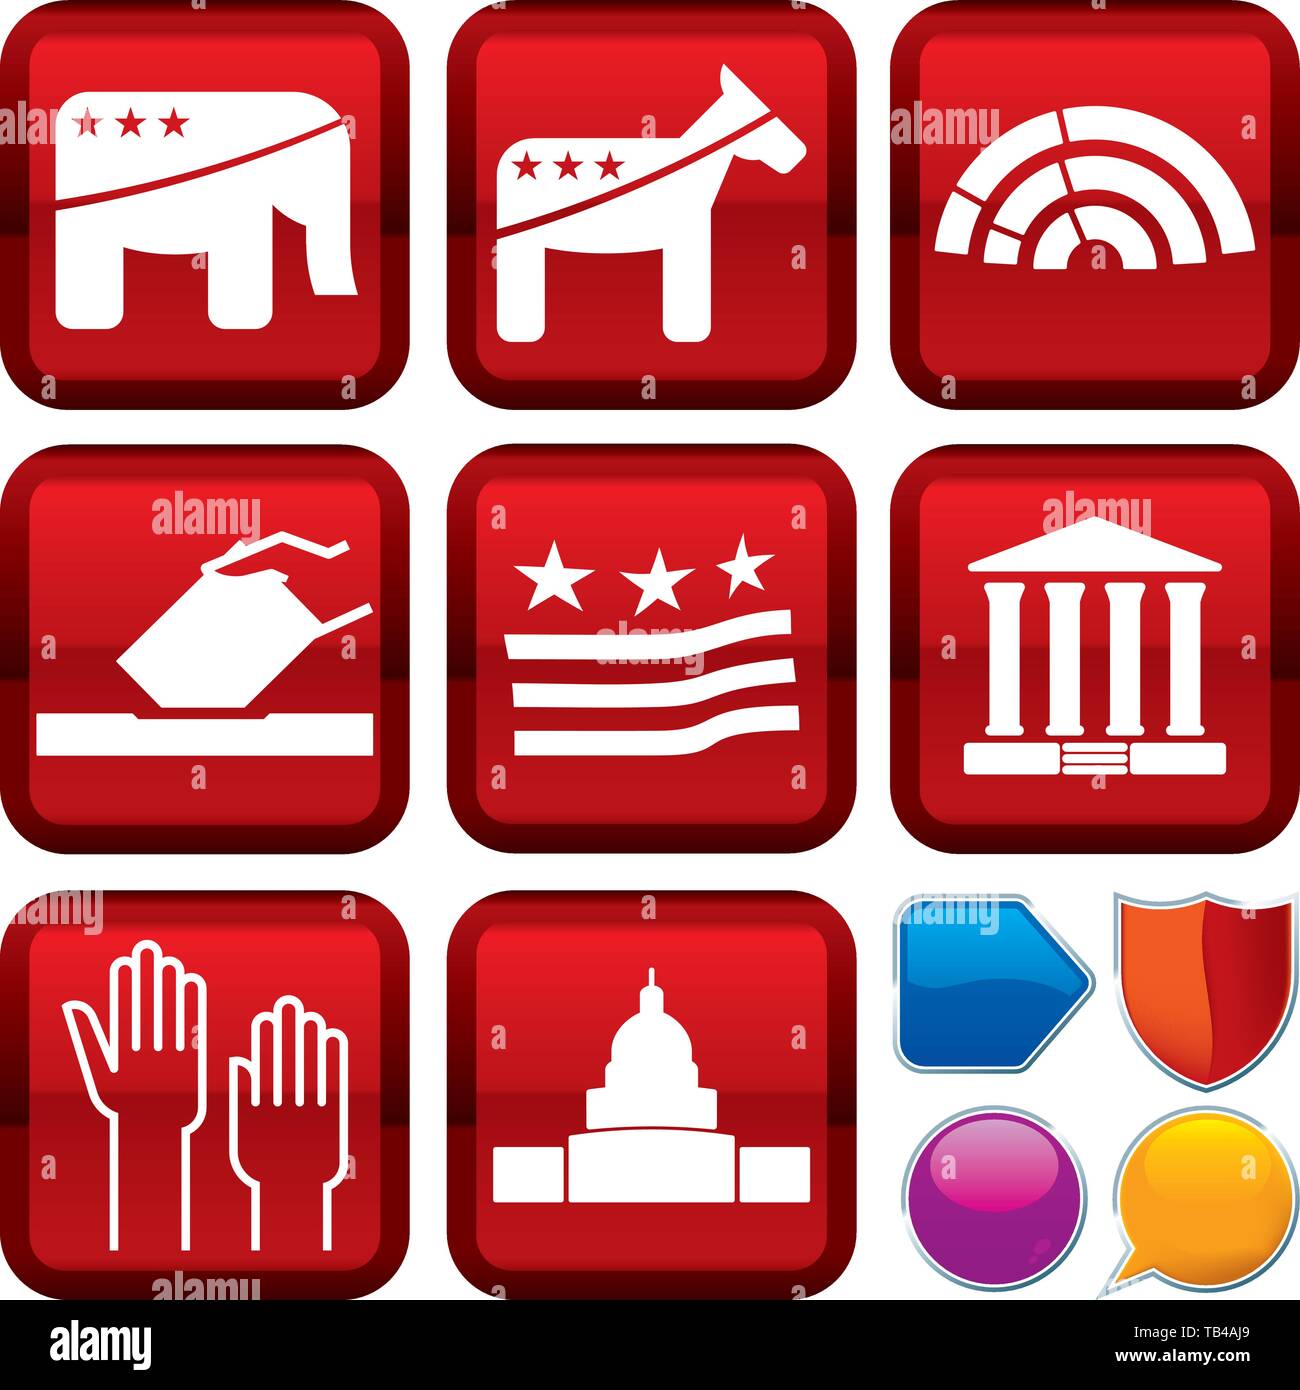 Vector illustration. Set of politics icons on square buttons. Geometric style. Stock Vector